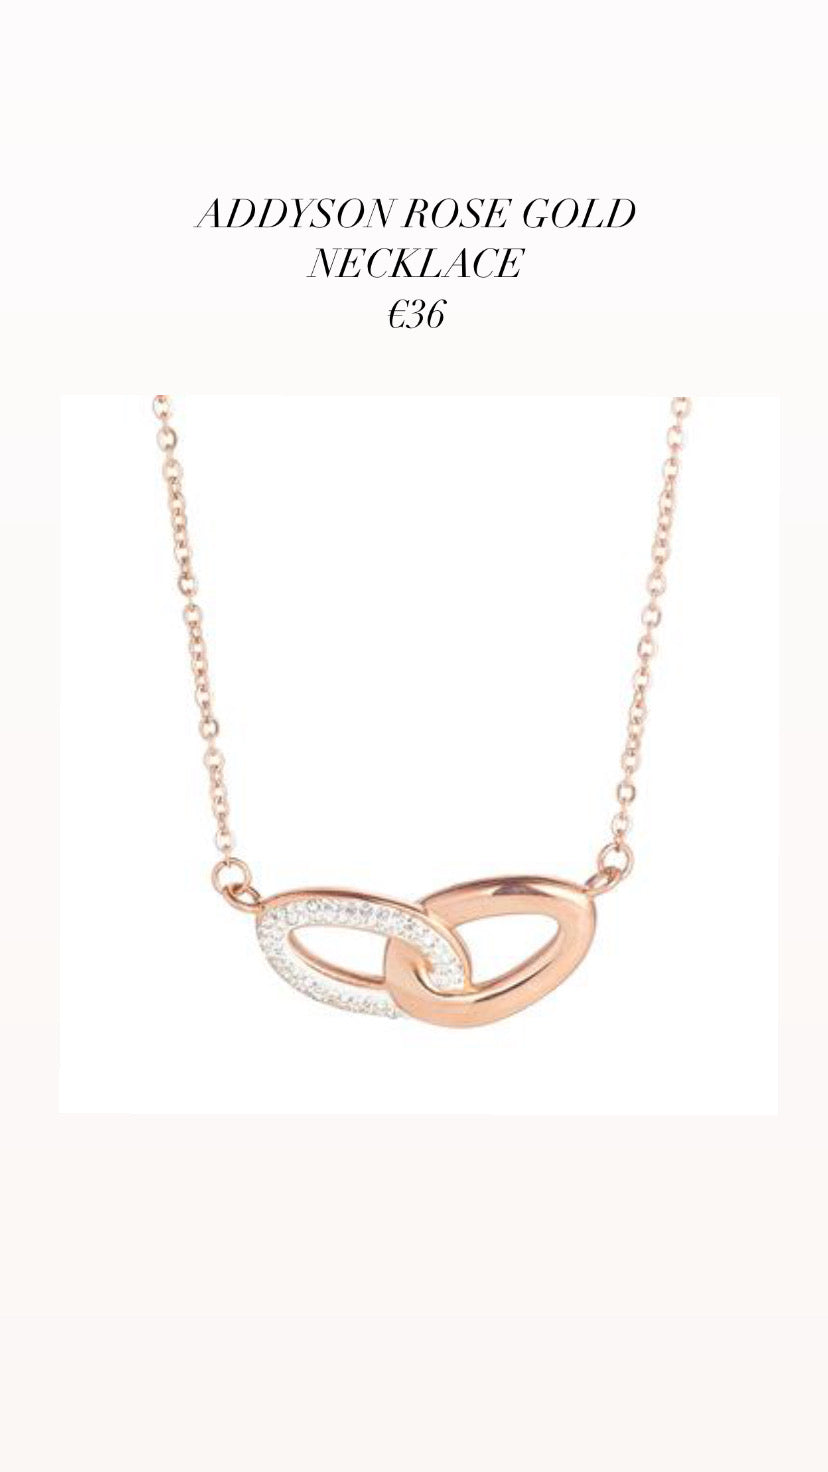 ADDYSON ROSE GOLD NECKLACE